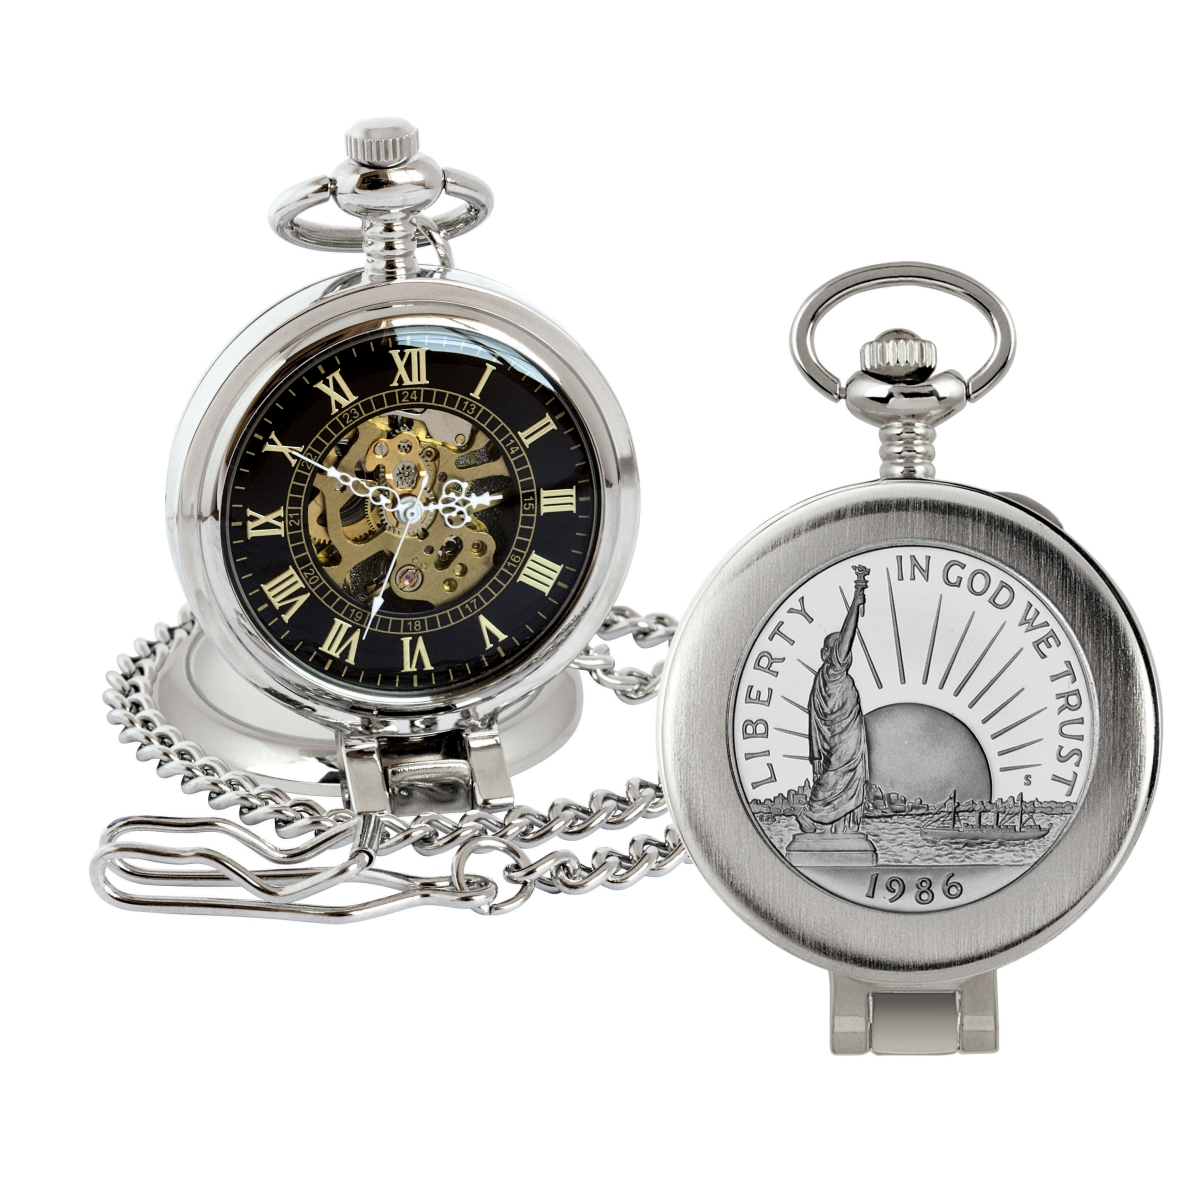 Picture of American Coin Treasures 16273 Statue of Liberty Commemorative Half Dollar Coin Pocket Watch with Skeleton Movement, Black Dial with Gold Roman Numerals - Magnifying Glass